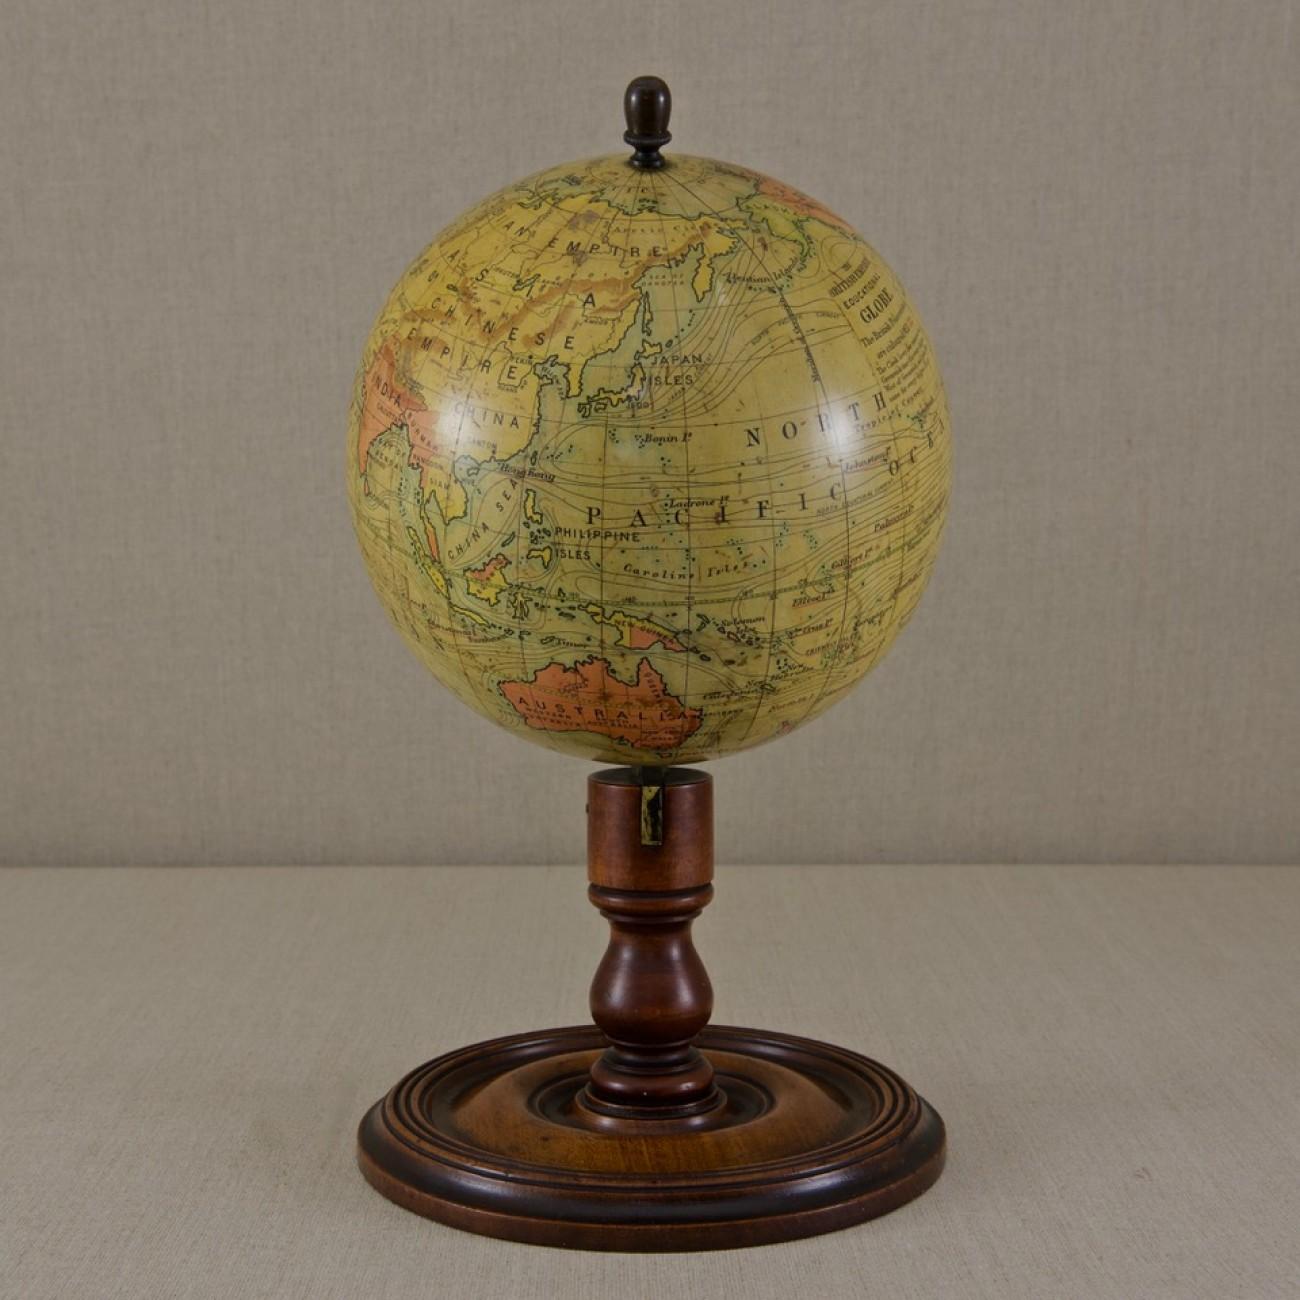 A handsome 8 inch terrestrial globe by C. Smith and Son printed in several colors presented on original turned mahogany base and upright, with brass mounting and secured with an acorn finial; circa 1890. The globe comprises of twelve coated